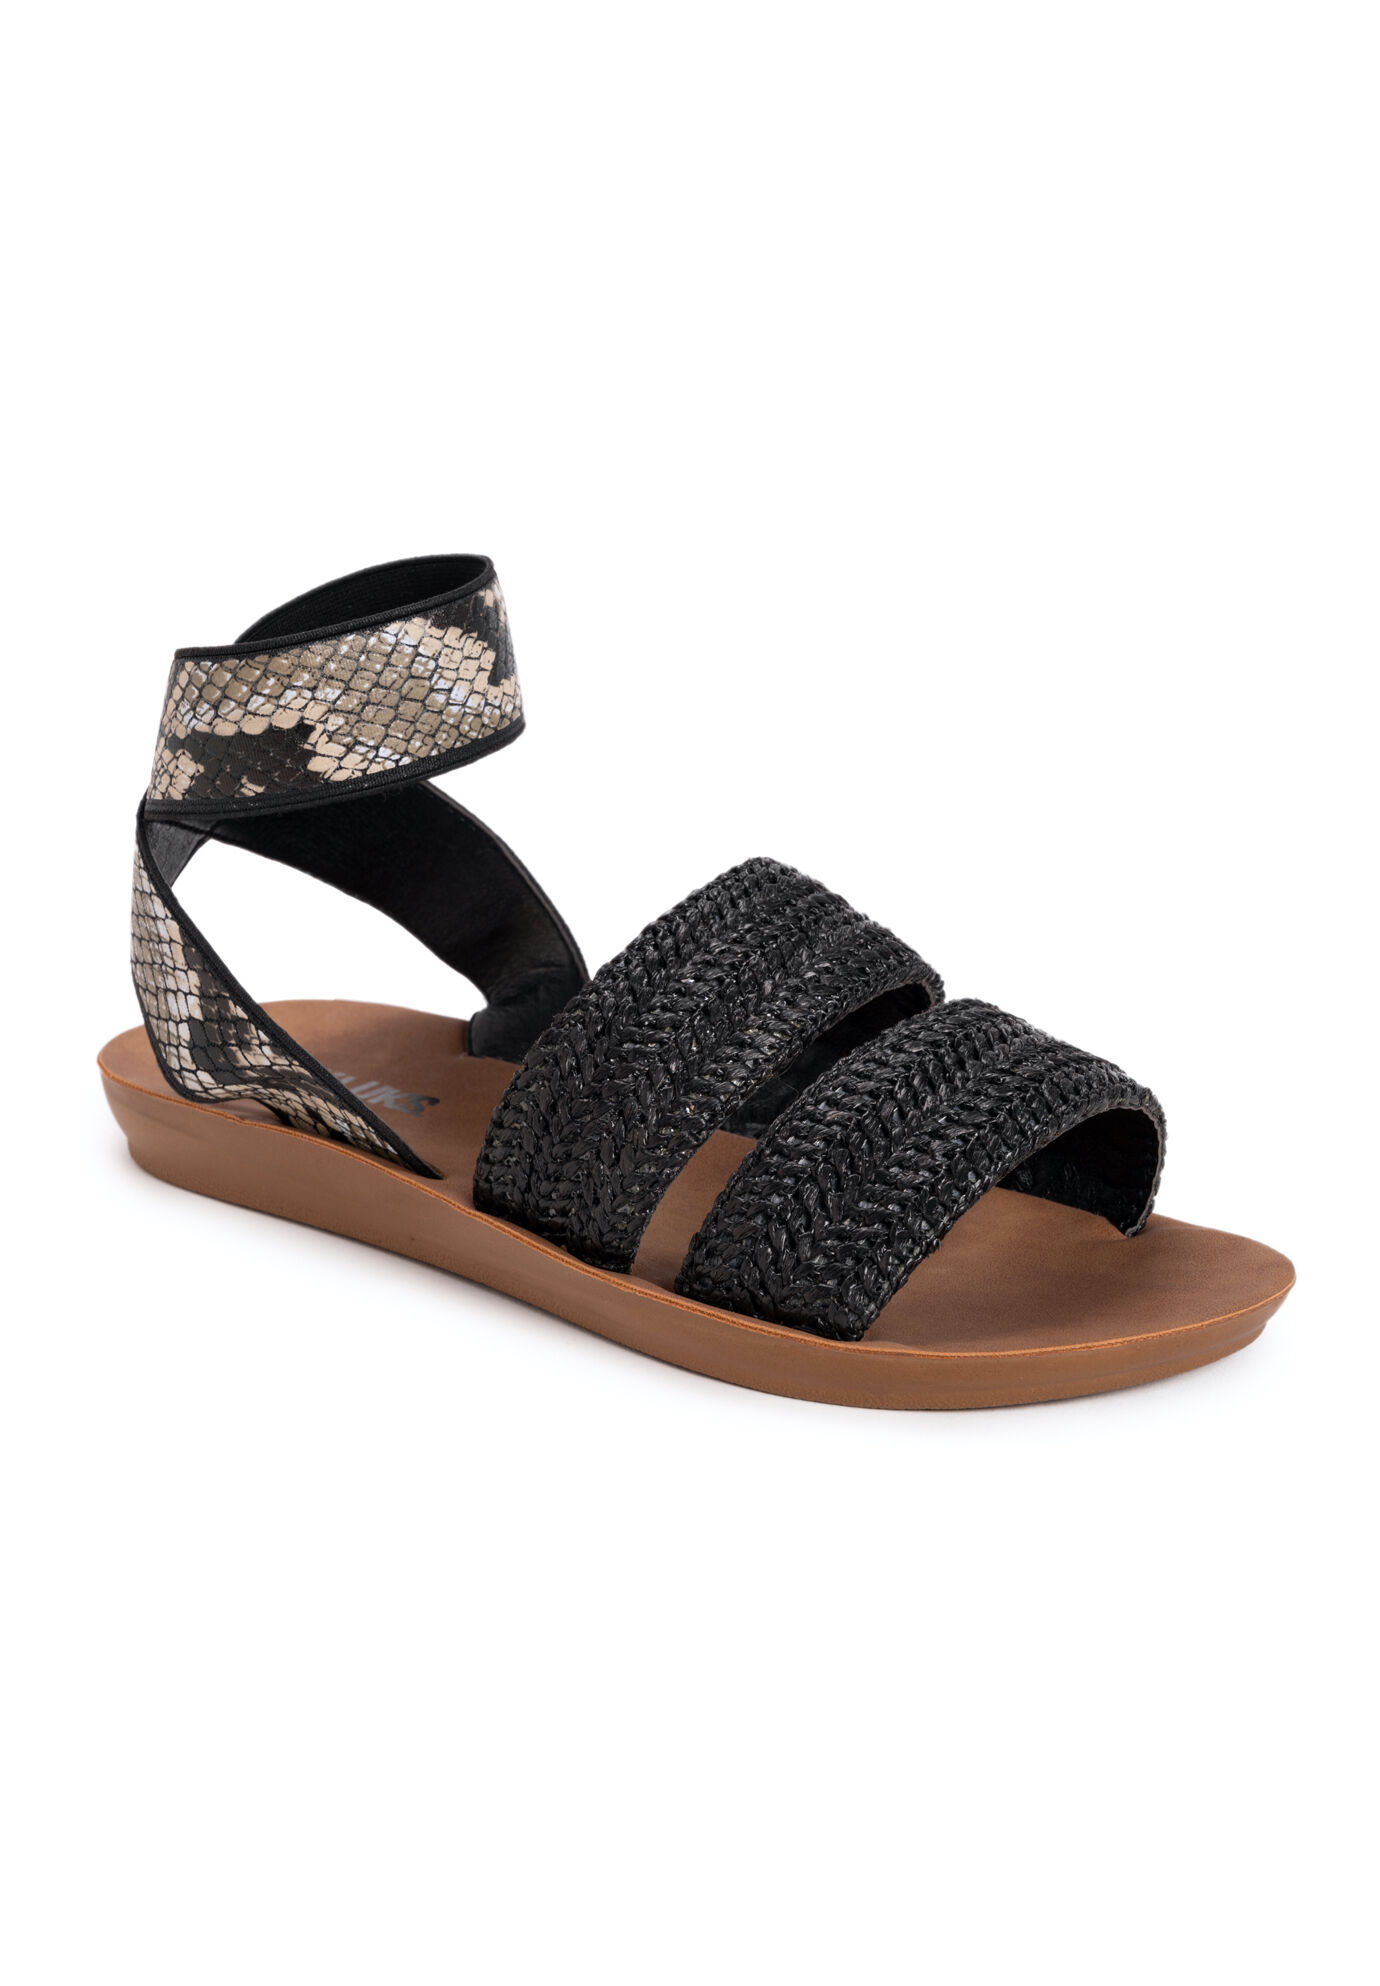 Women's About Me Sandals by MUK LUKS in Black (Size 9 M)